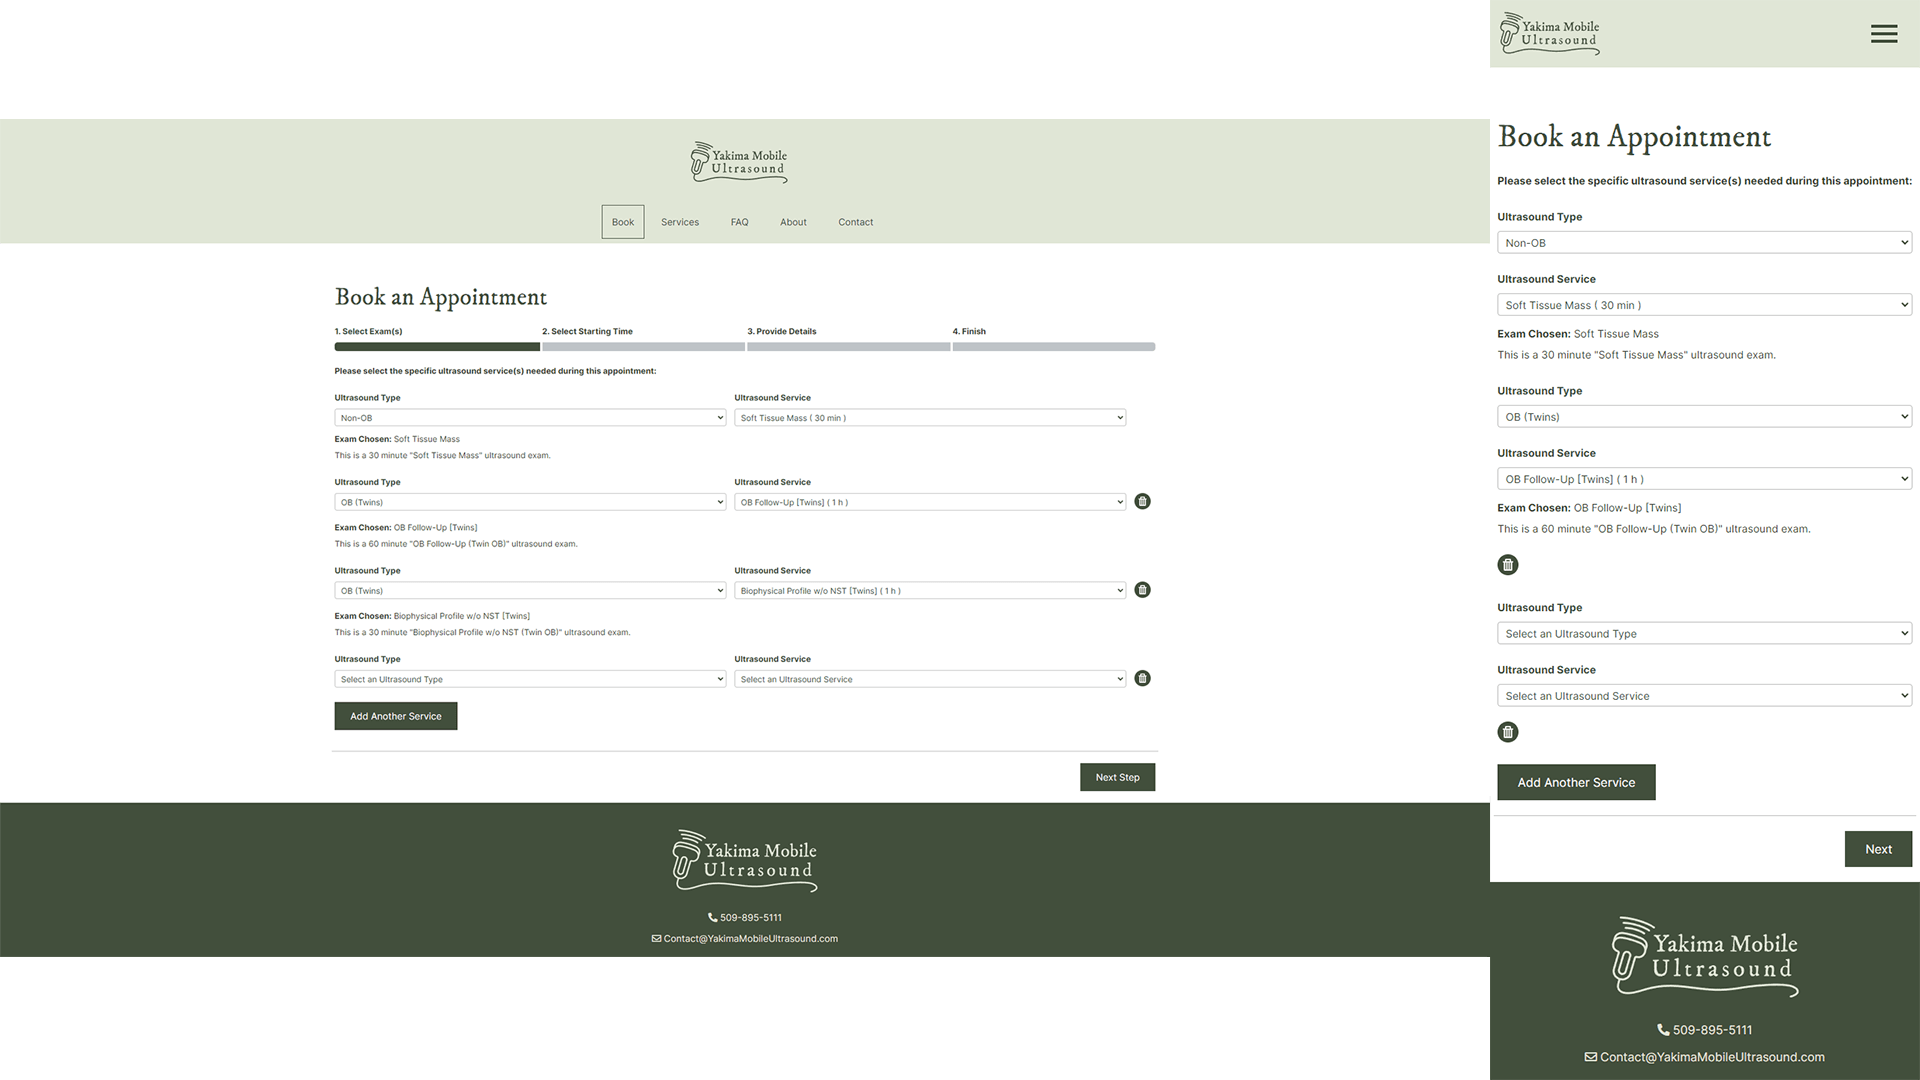 JDM of Washington – Desktop and mobile device screenshots of the appointment booking webpage